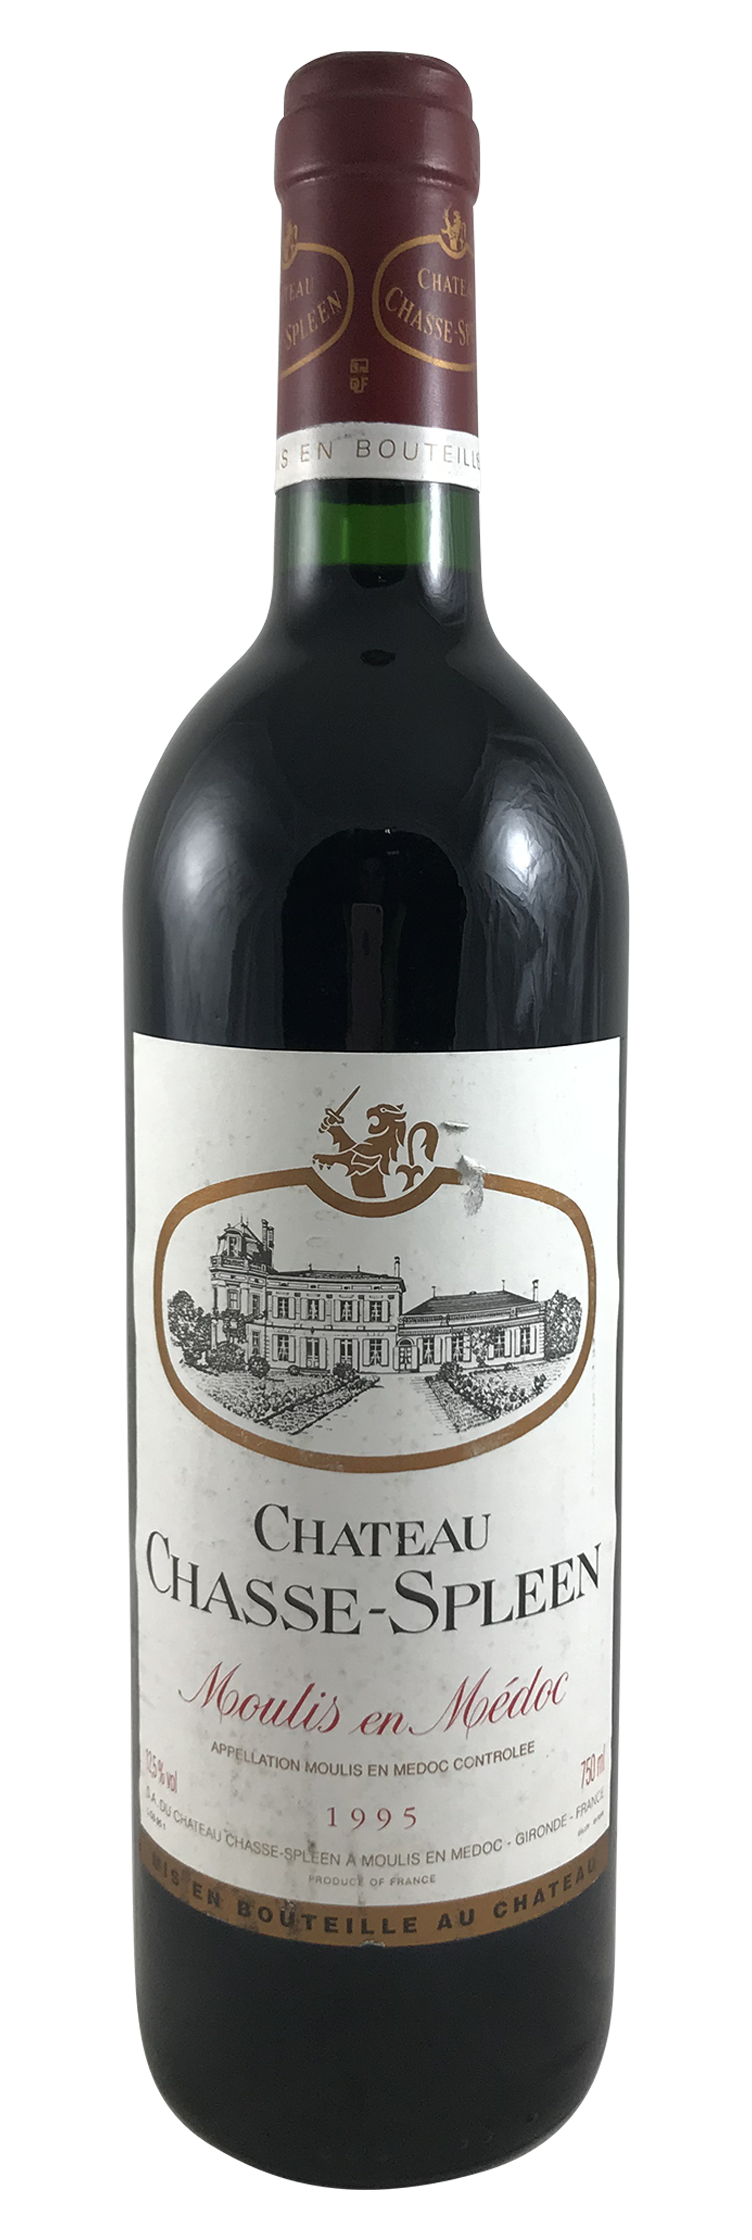 Château Chasse-Spleen 1995 Moulis